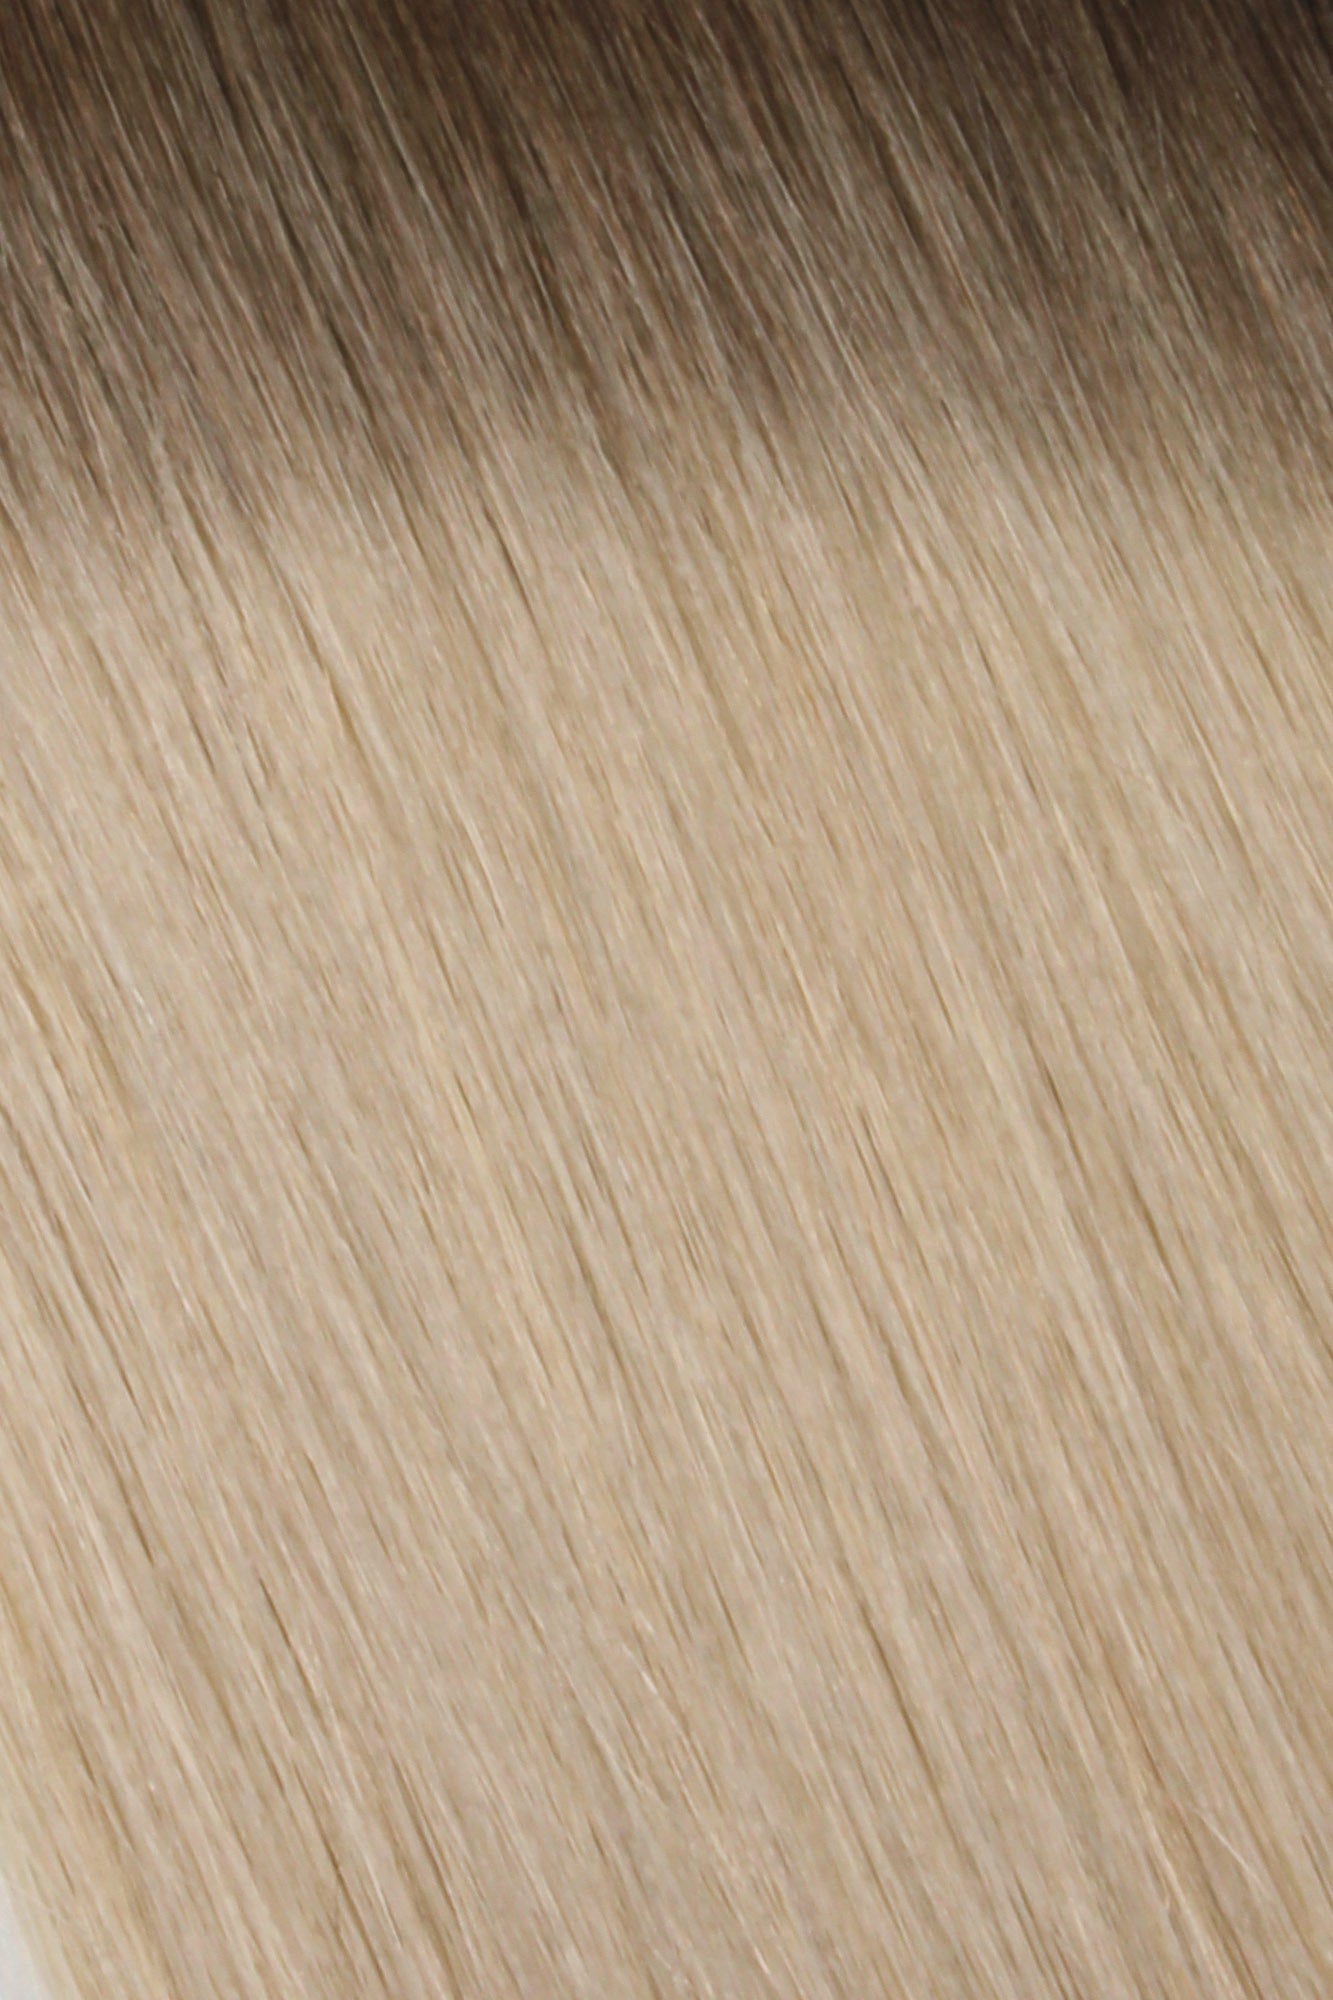 SEAMLESS® Flat Weft 18 Inches - SWAY Hair Extensions Rooted-Hollywood-Ash-Blonde-R5-18A-613A Natural SEAMLESS® Flat Weft 18 Inches extensions. Thin, flexible, and discreet. 100% Double Drawn Remy Human Hair. Versatile and reusable